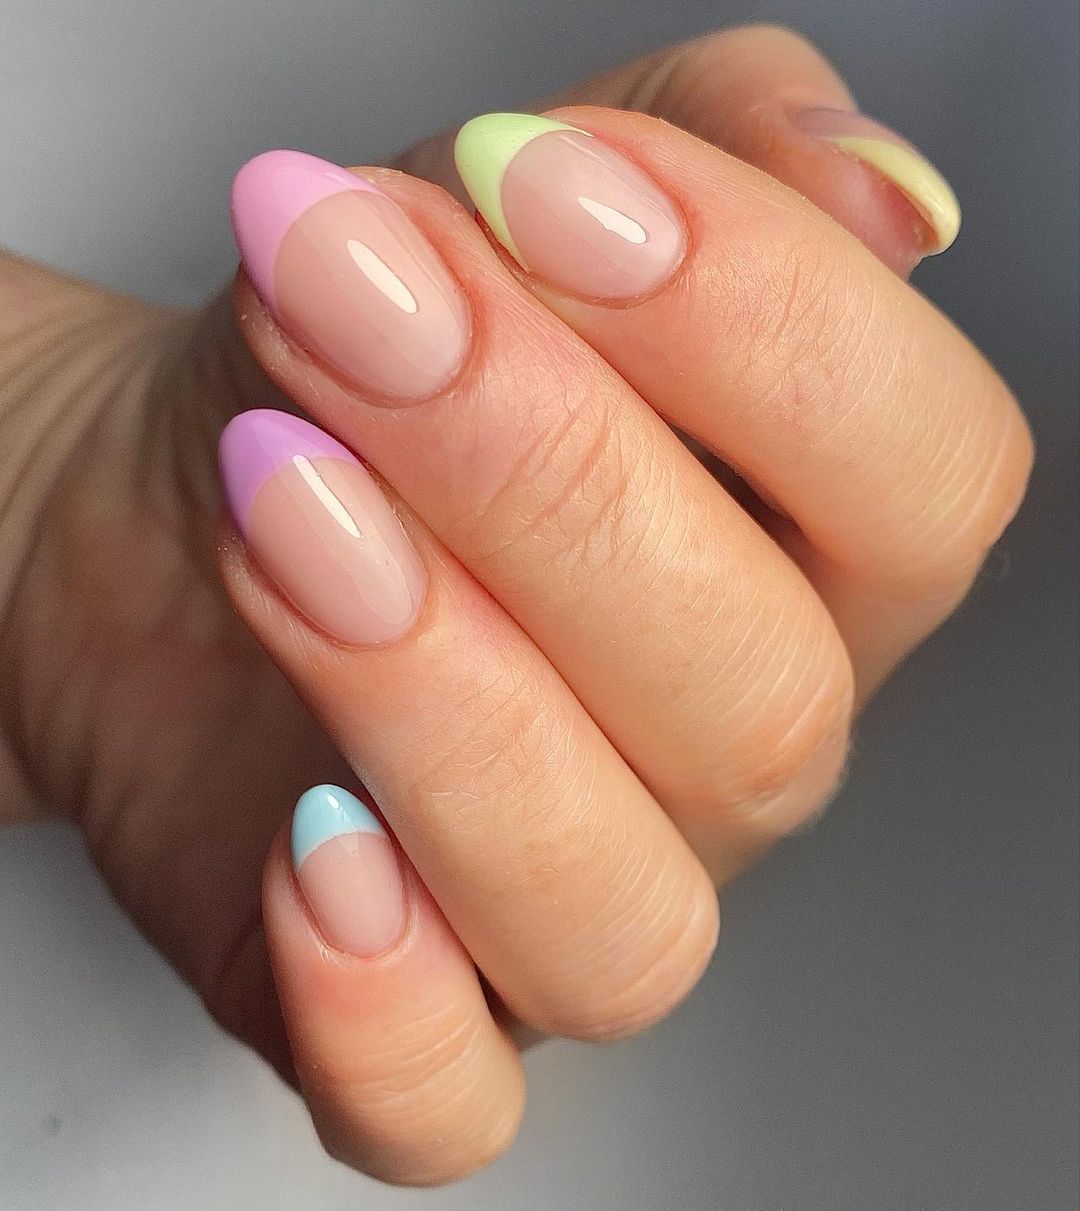 Colourful french manicure